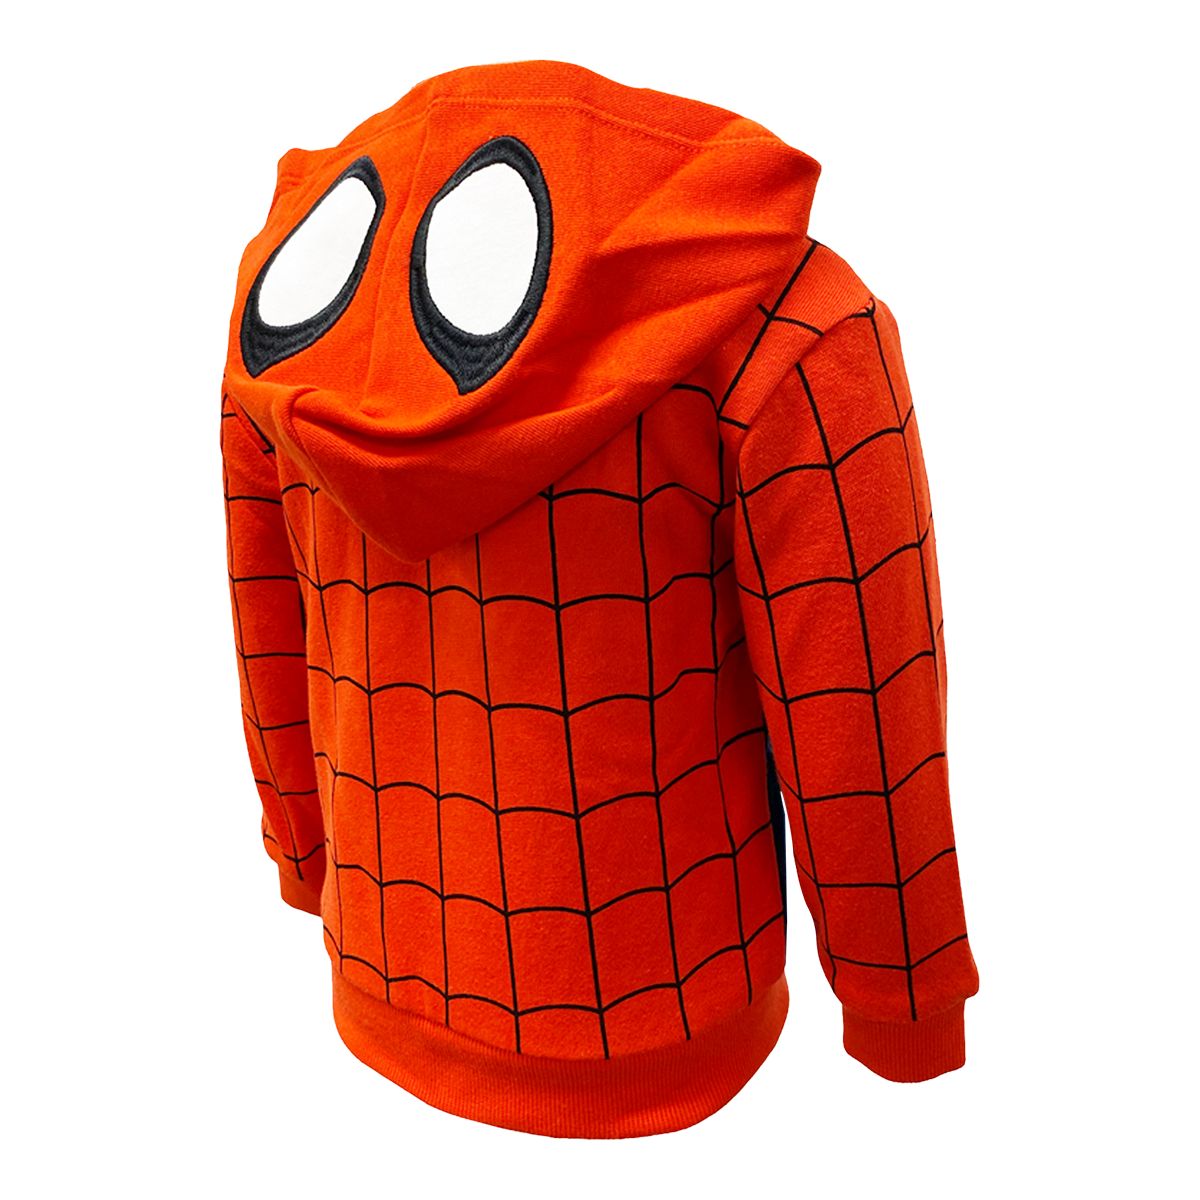 https://media-www.sportchek.ca/product/div-03-softgoods/dpt-72-casual-clothing/sdpt-05-preschool/334136862/character-tod-young-spidey-po-hoodie-q323-red-edd963cc-fac3-4e3c-88c6-ffd43cb589e9-jpgrendition.jpg?imdensity=1&imwidth=1244&impolicy=mZoom